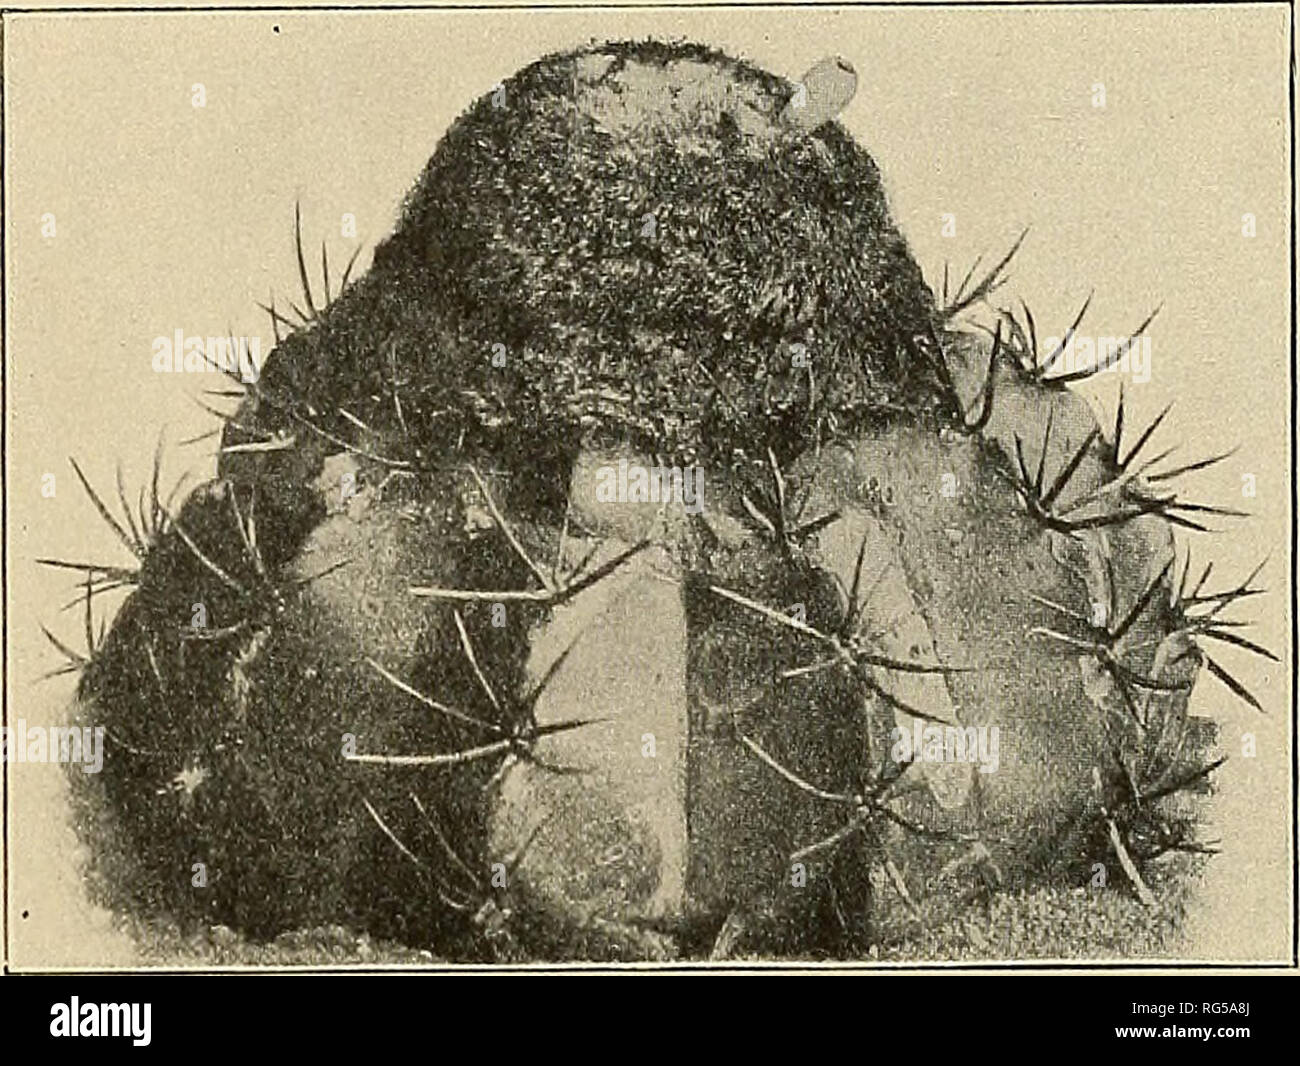 . The Cactaceae : descriptions and illustrations of plants of the cactus family. CACTUS. 237. A living plant was sent to Dr. Rose by Professor C. Conzatti in October 1913 (No. 151a), from Salina Cruz, Oaxaca, and it has been reported by Dr. C. A. Purpus from San Geronimo. Dr. Purpus has written to us as follows: '' The Melocactus from San Geronimo is indeed a most interesting and remark- able cactus. When I saw the cactus, I mean to say without a crown, very few specimens ever having one, I thought it was an Echinocaclus, but of course it is undoubtedly a small Melocactus, the smallest which I Stock Photo